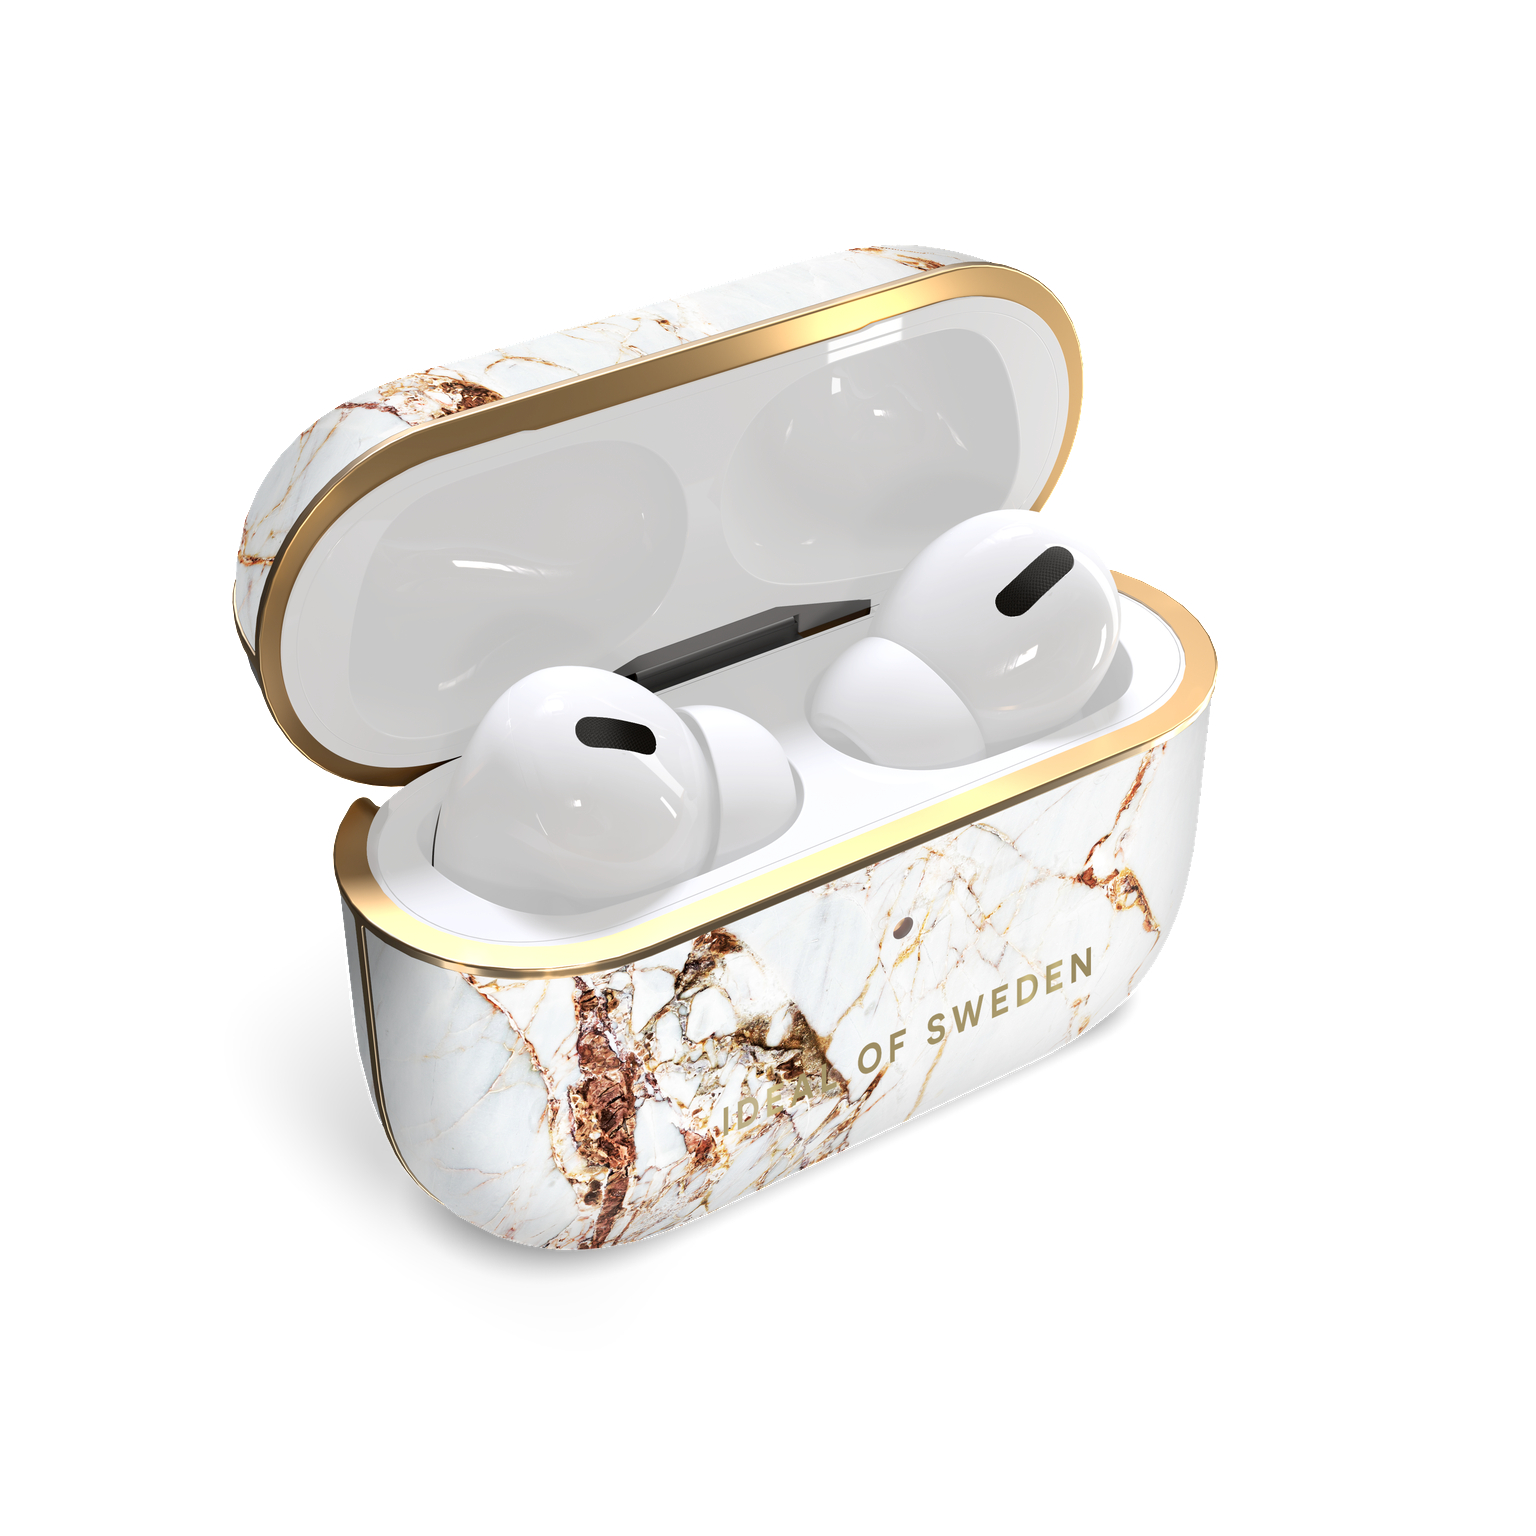 OF Case IDFAPC-PRO-46 SWEDEN AirPod IDEAL